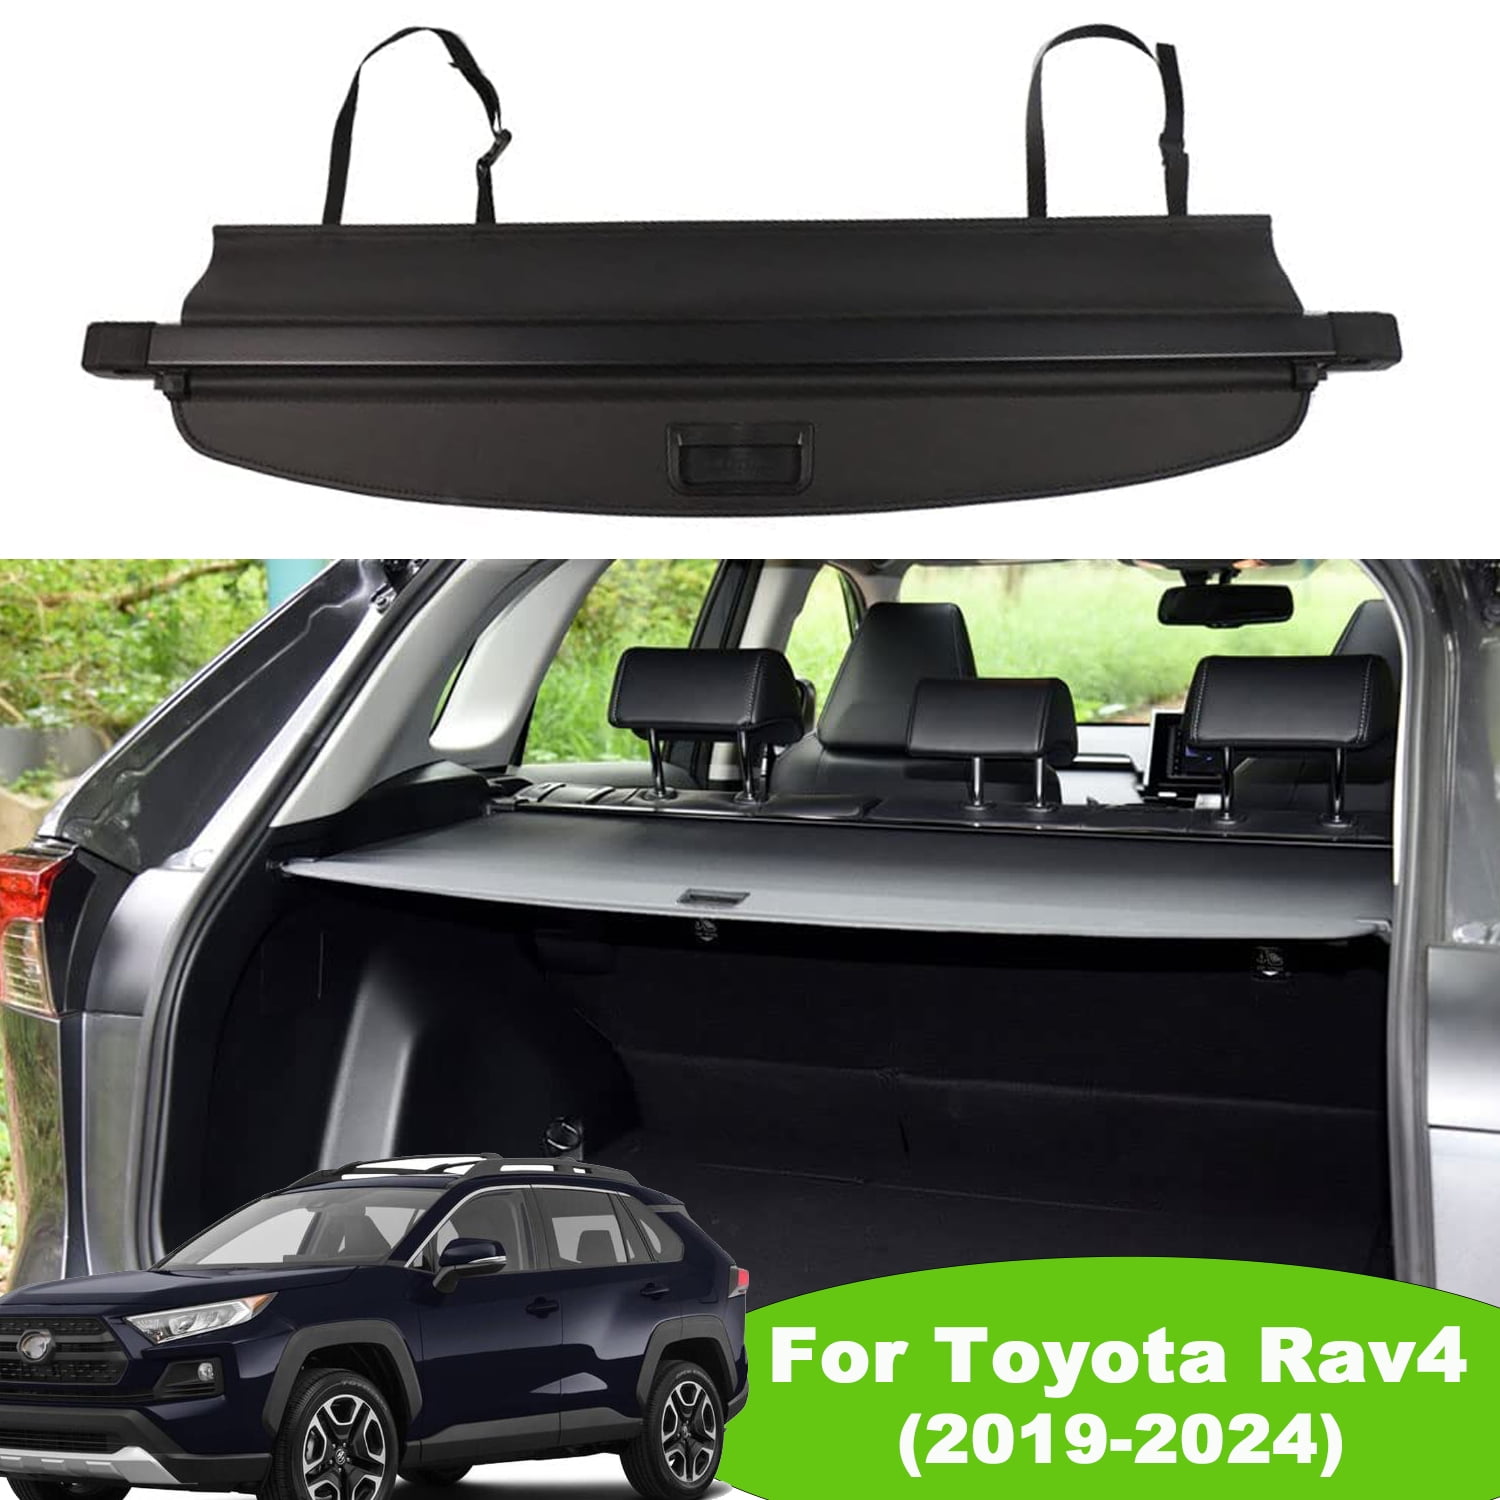 Powerty Cargo Cover Compatible with Hyundai Kona 2018-2023 Accessories  Trunk Cover Trunk Security Shield Shade Black (Can Withstand Load)